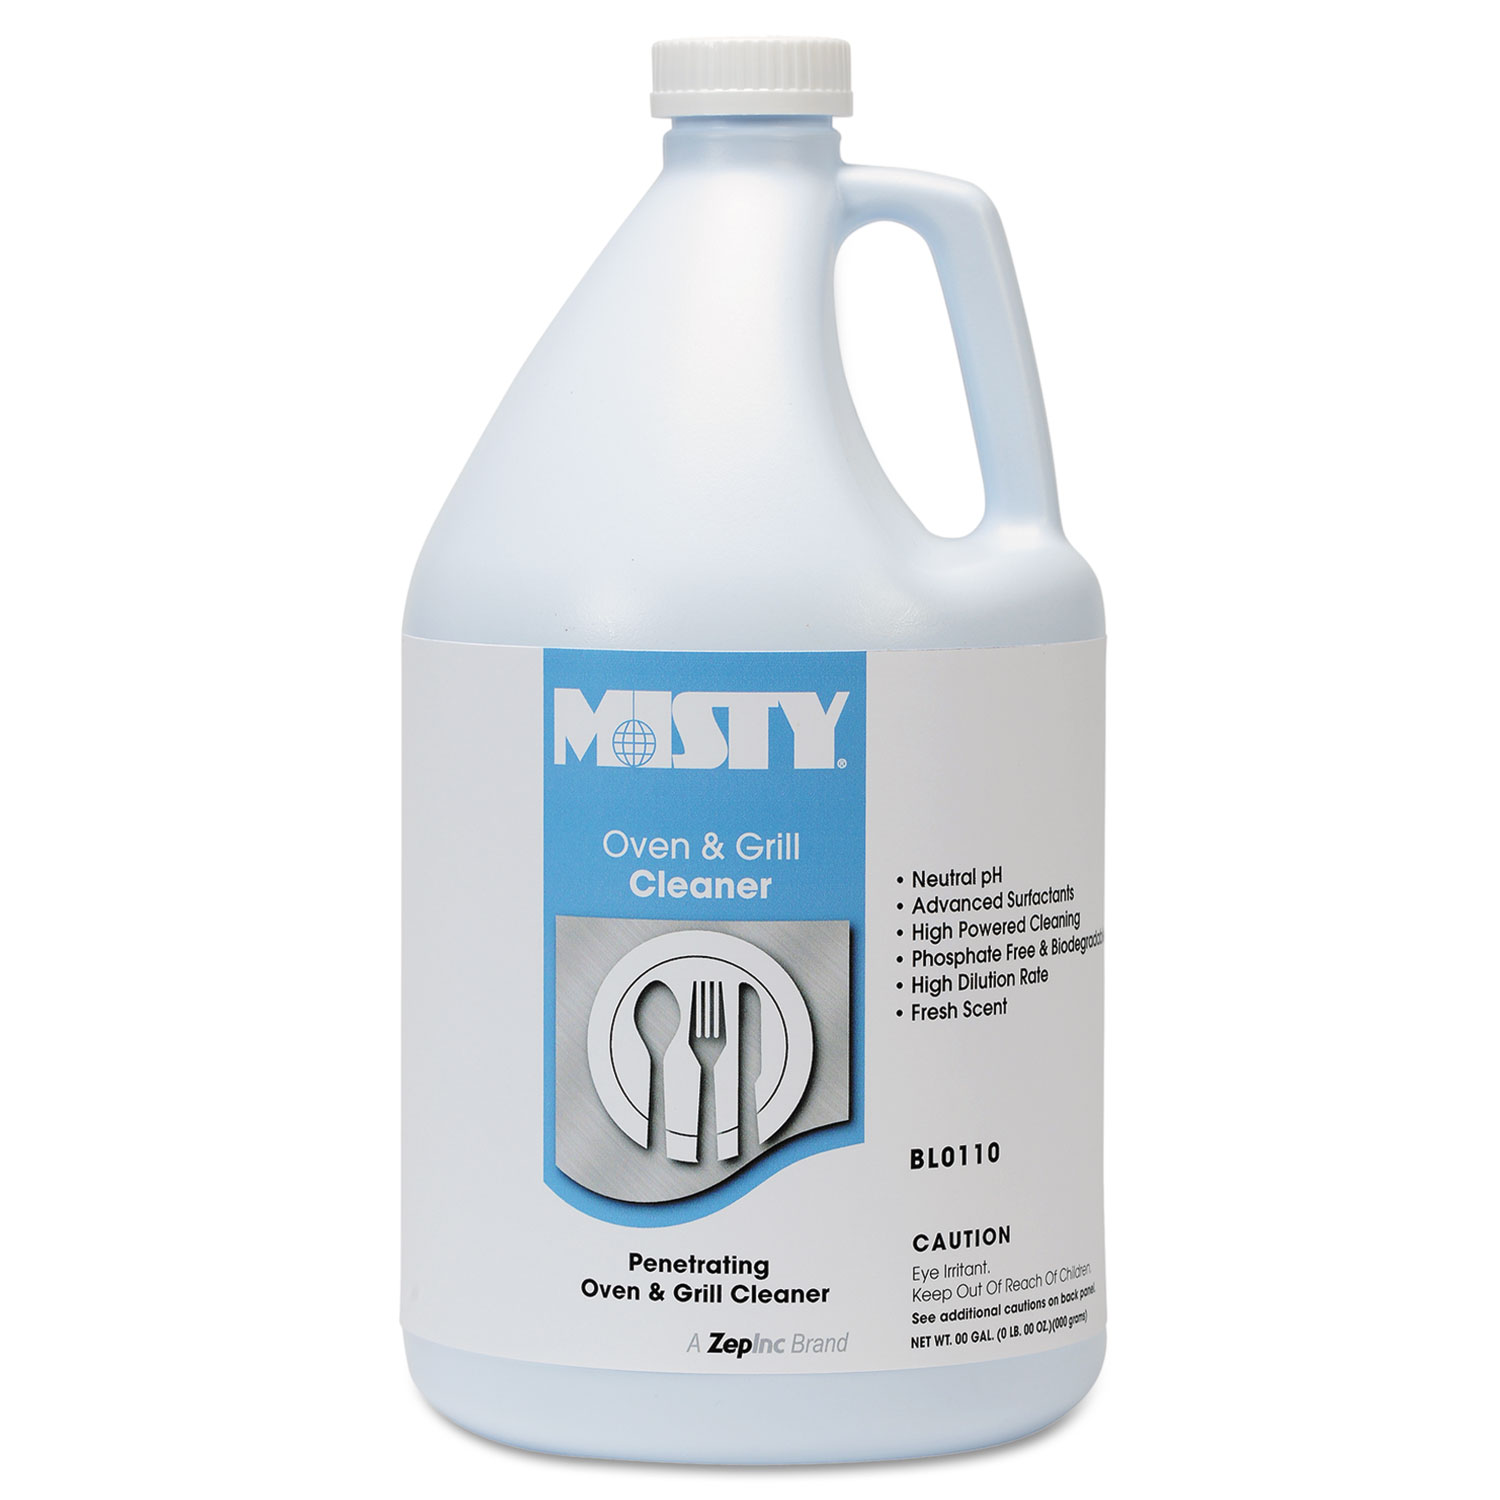  Misty 1038695 Heavy-Duty Oven and Grill Cleaner, 1 gal. Bottle (AMR1038695) 